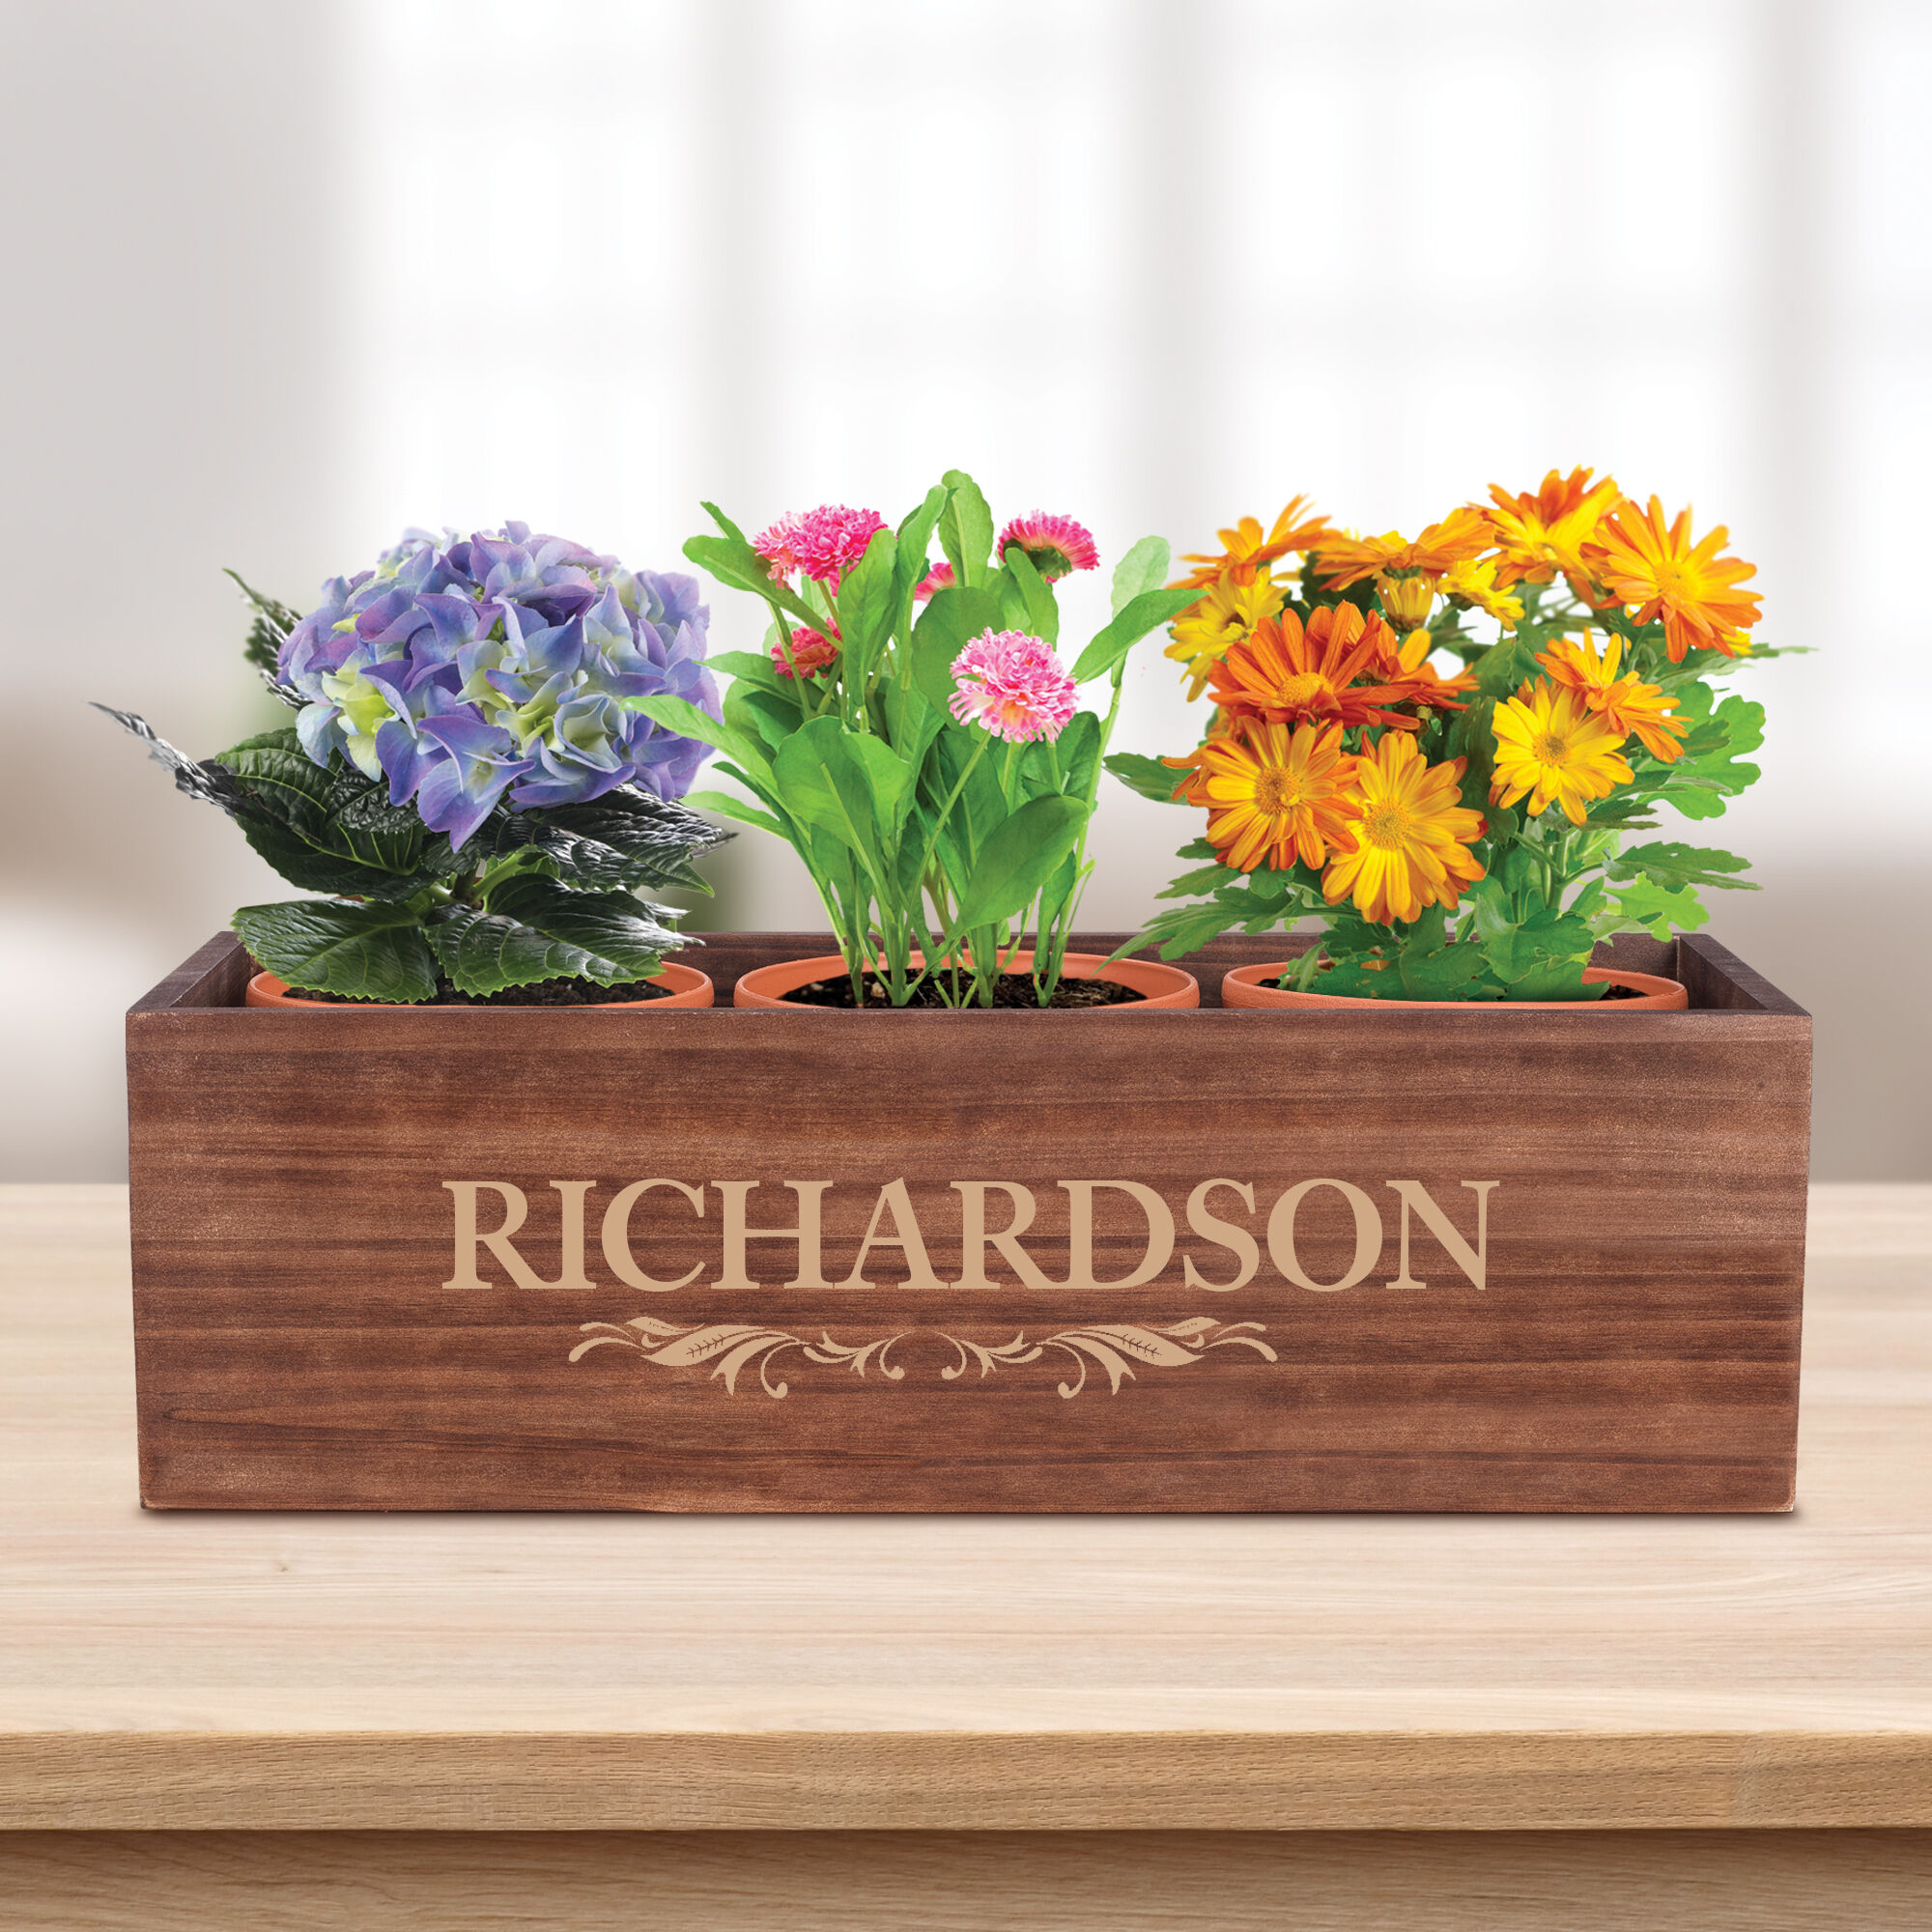 The Personalized Wood Planter Box 10878 0016 c flower